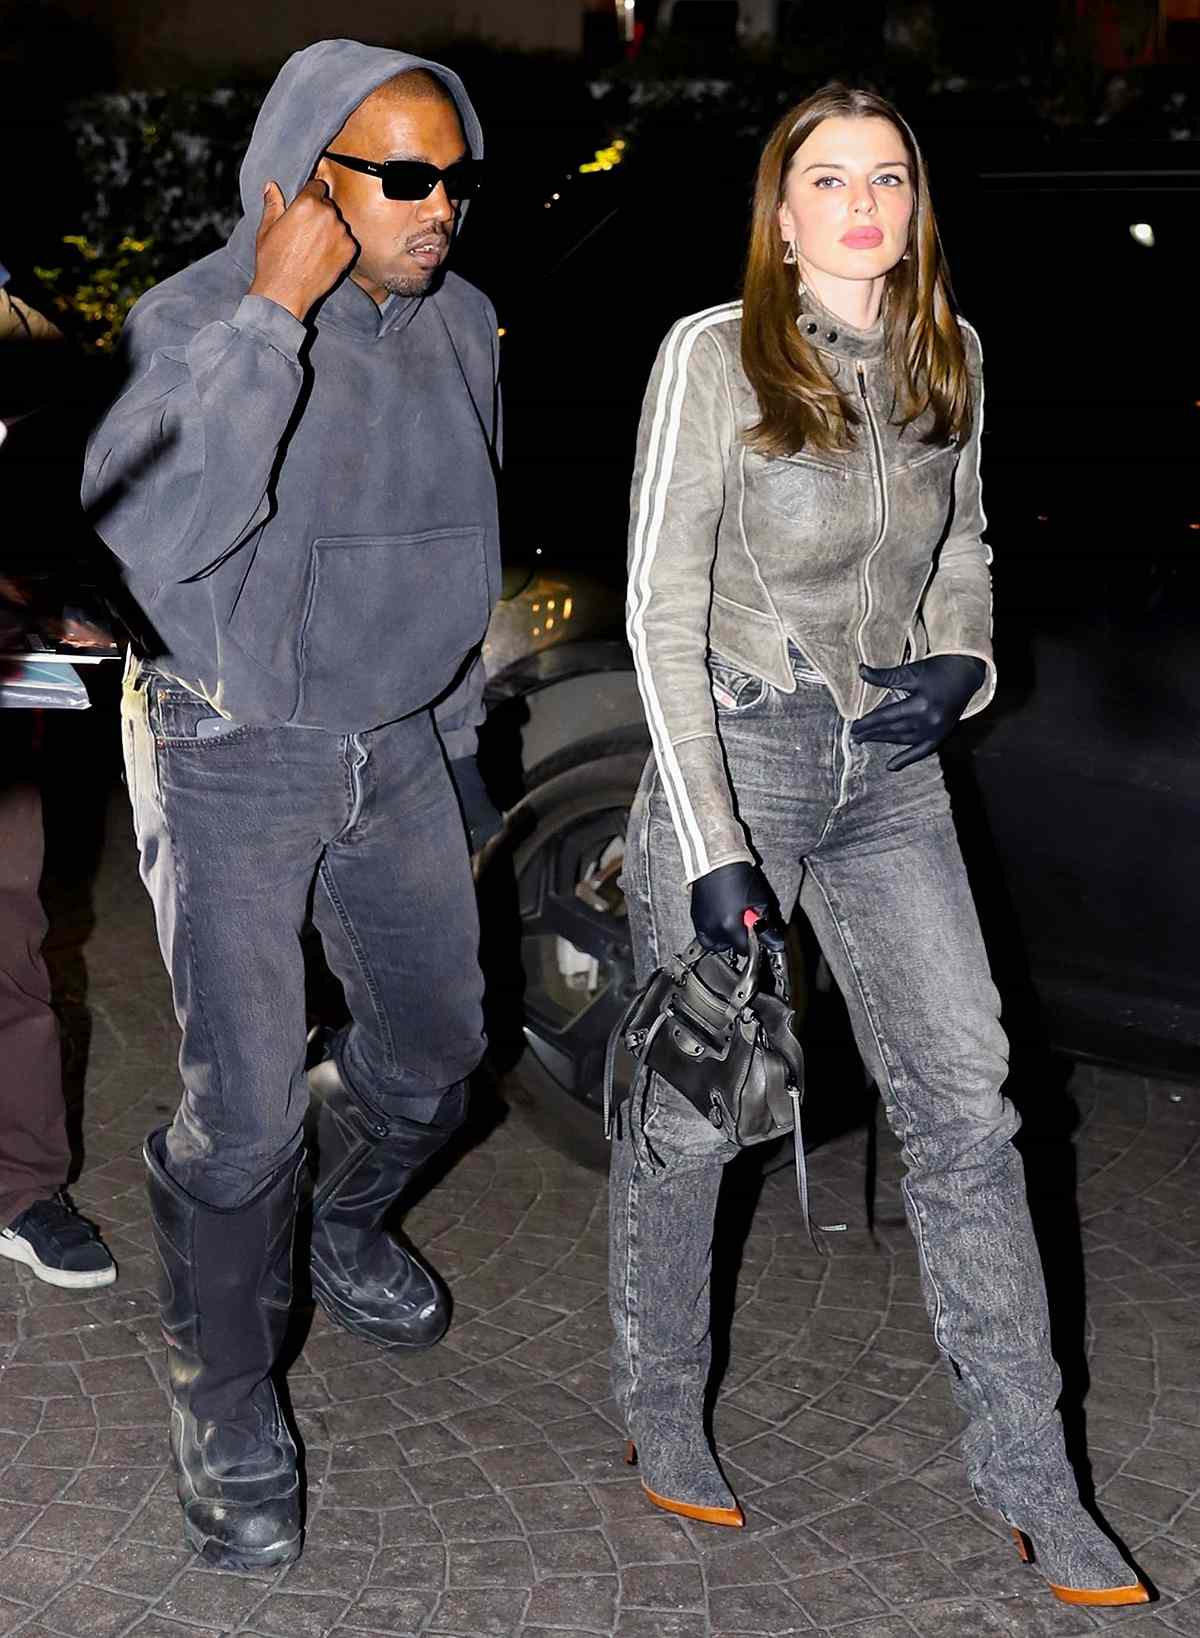 Kanye West and Julia Fox end the night at a Hollywood hotel after their dinner date!